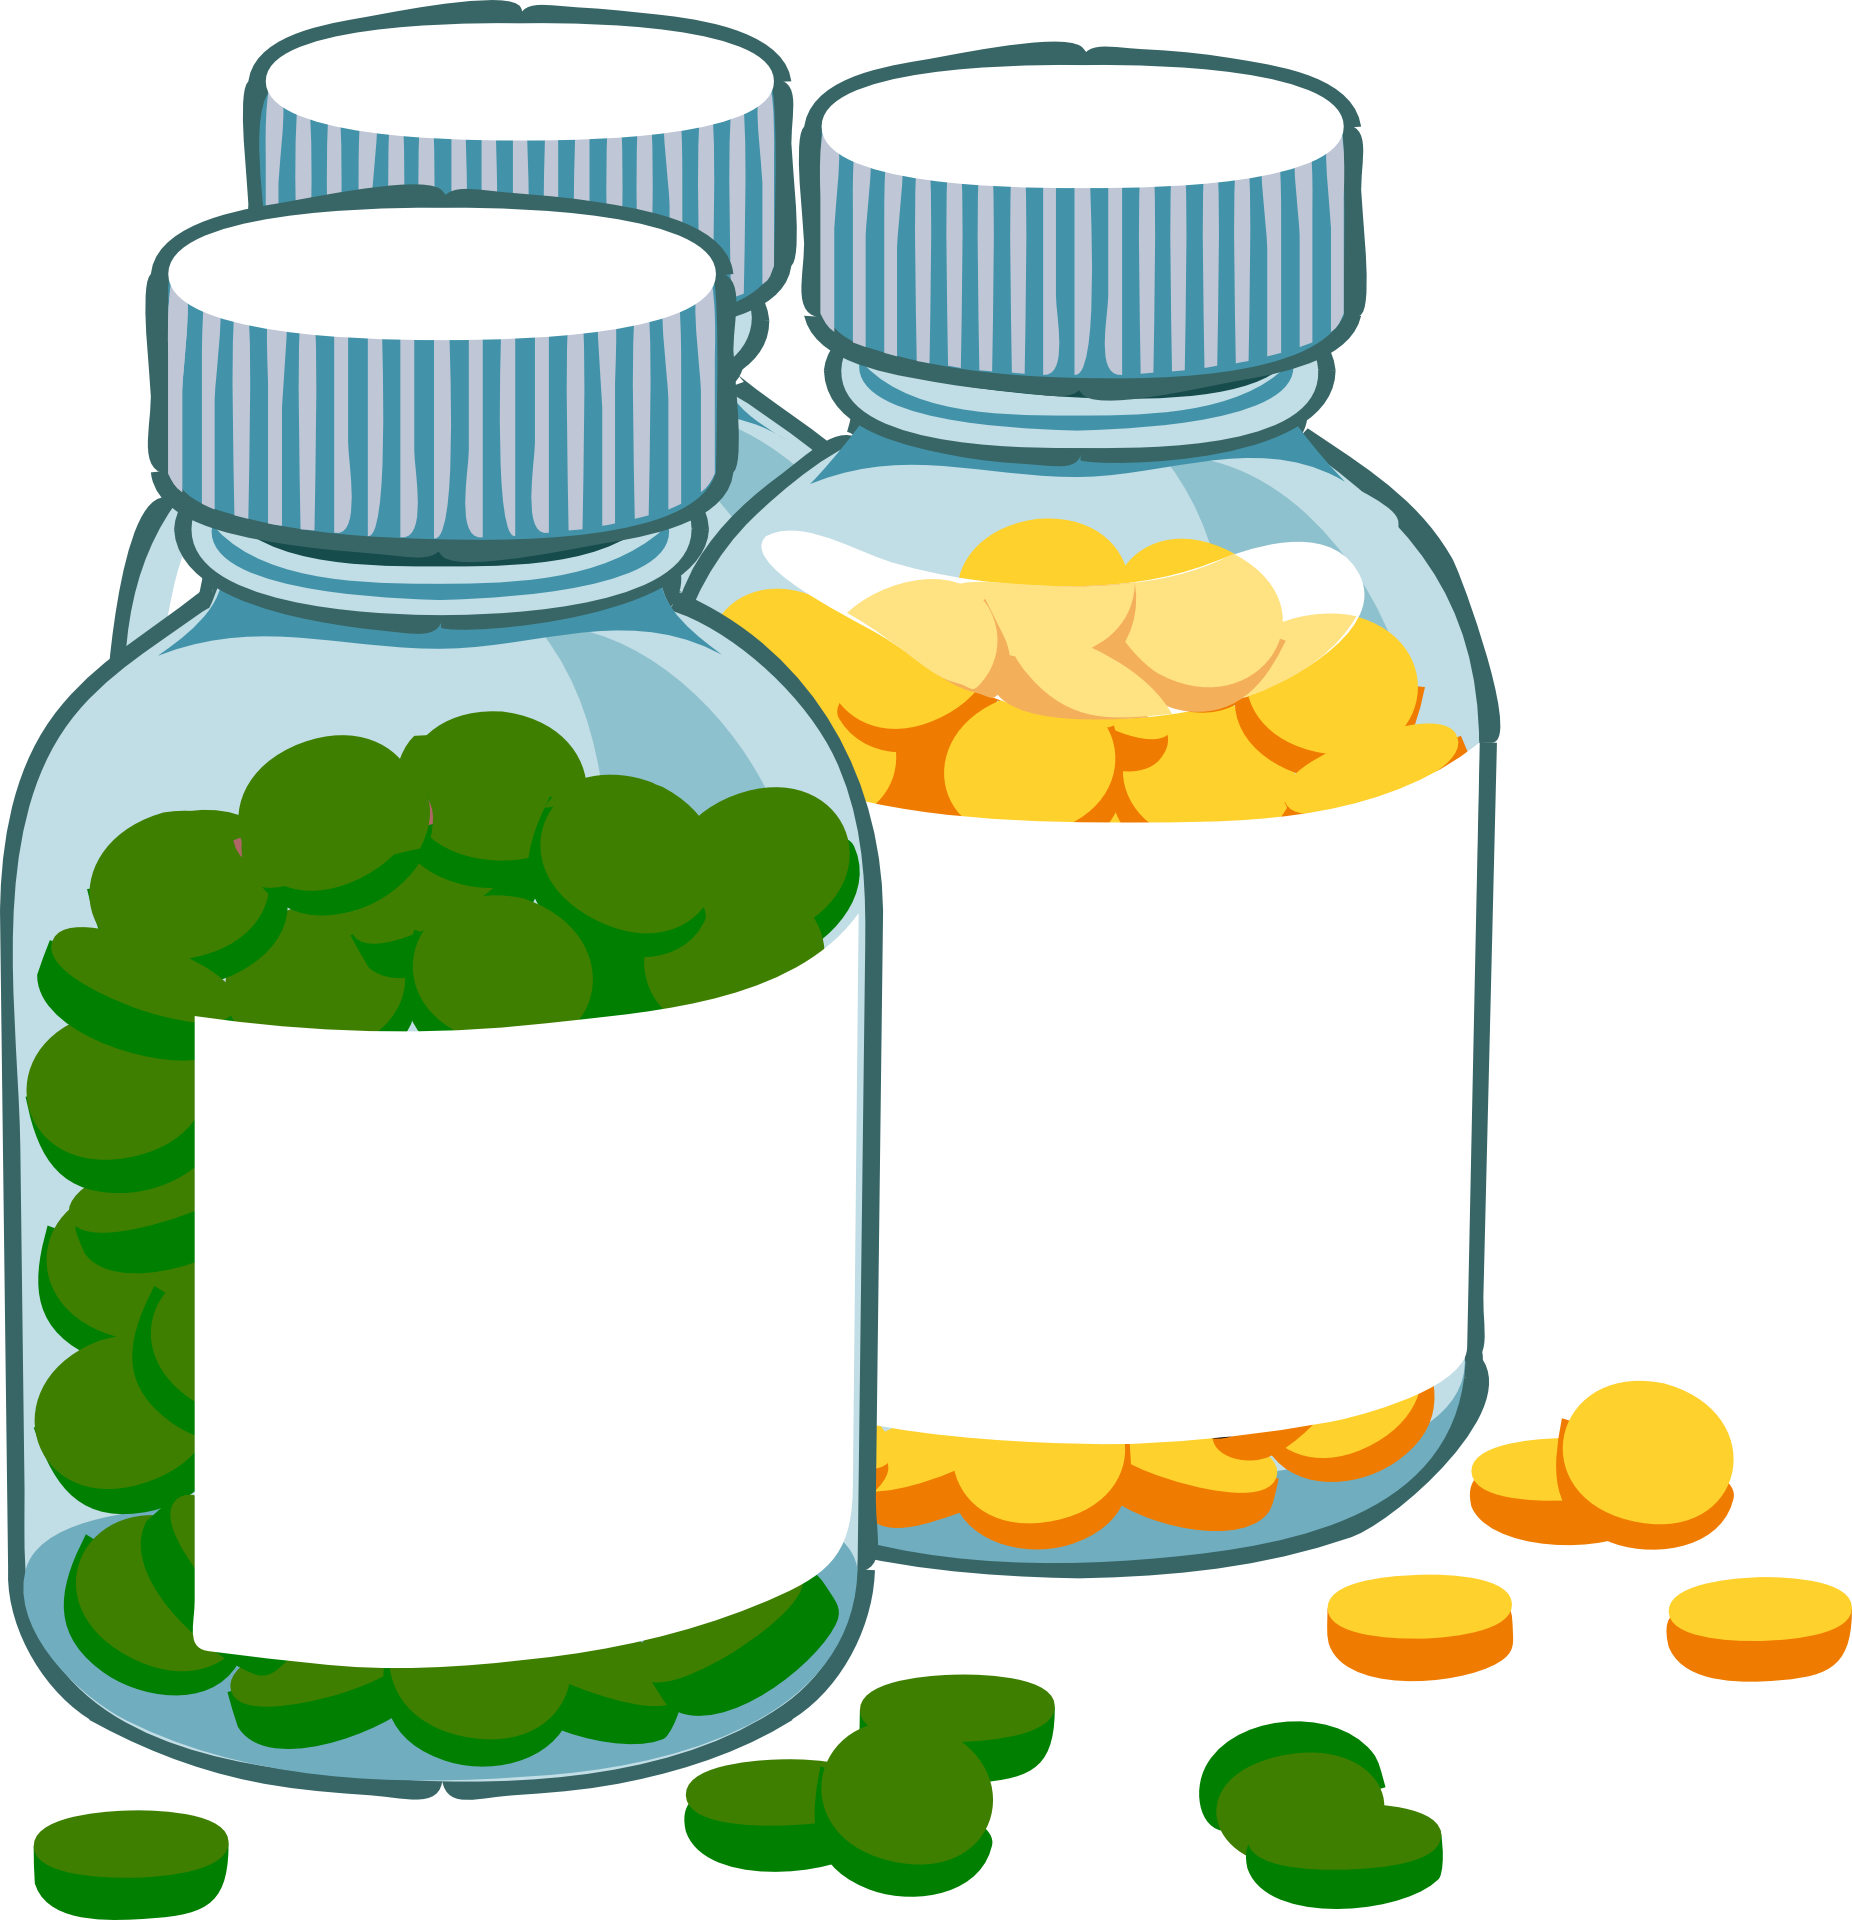 medication clipart syrup